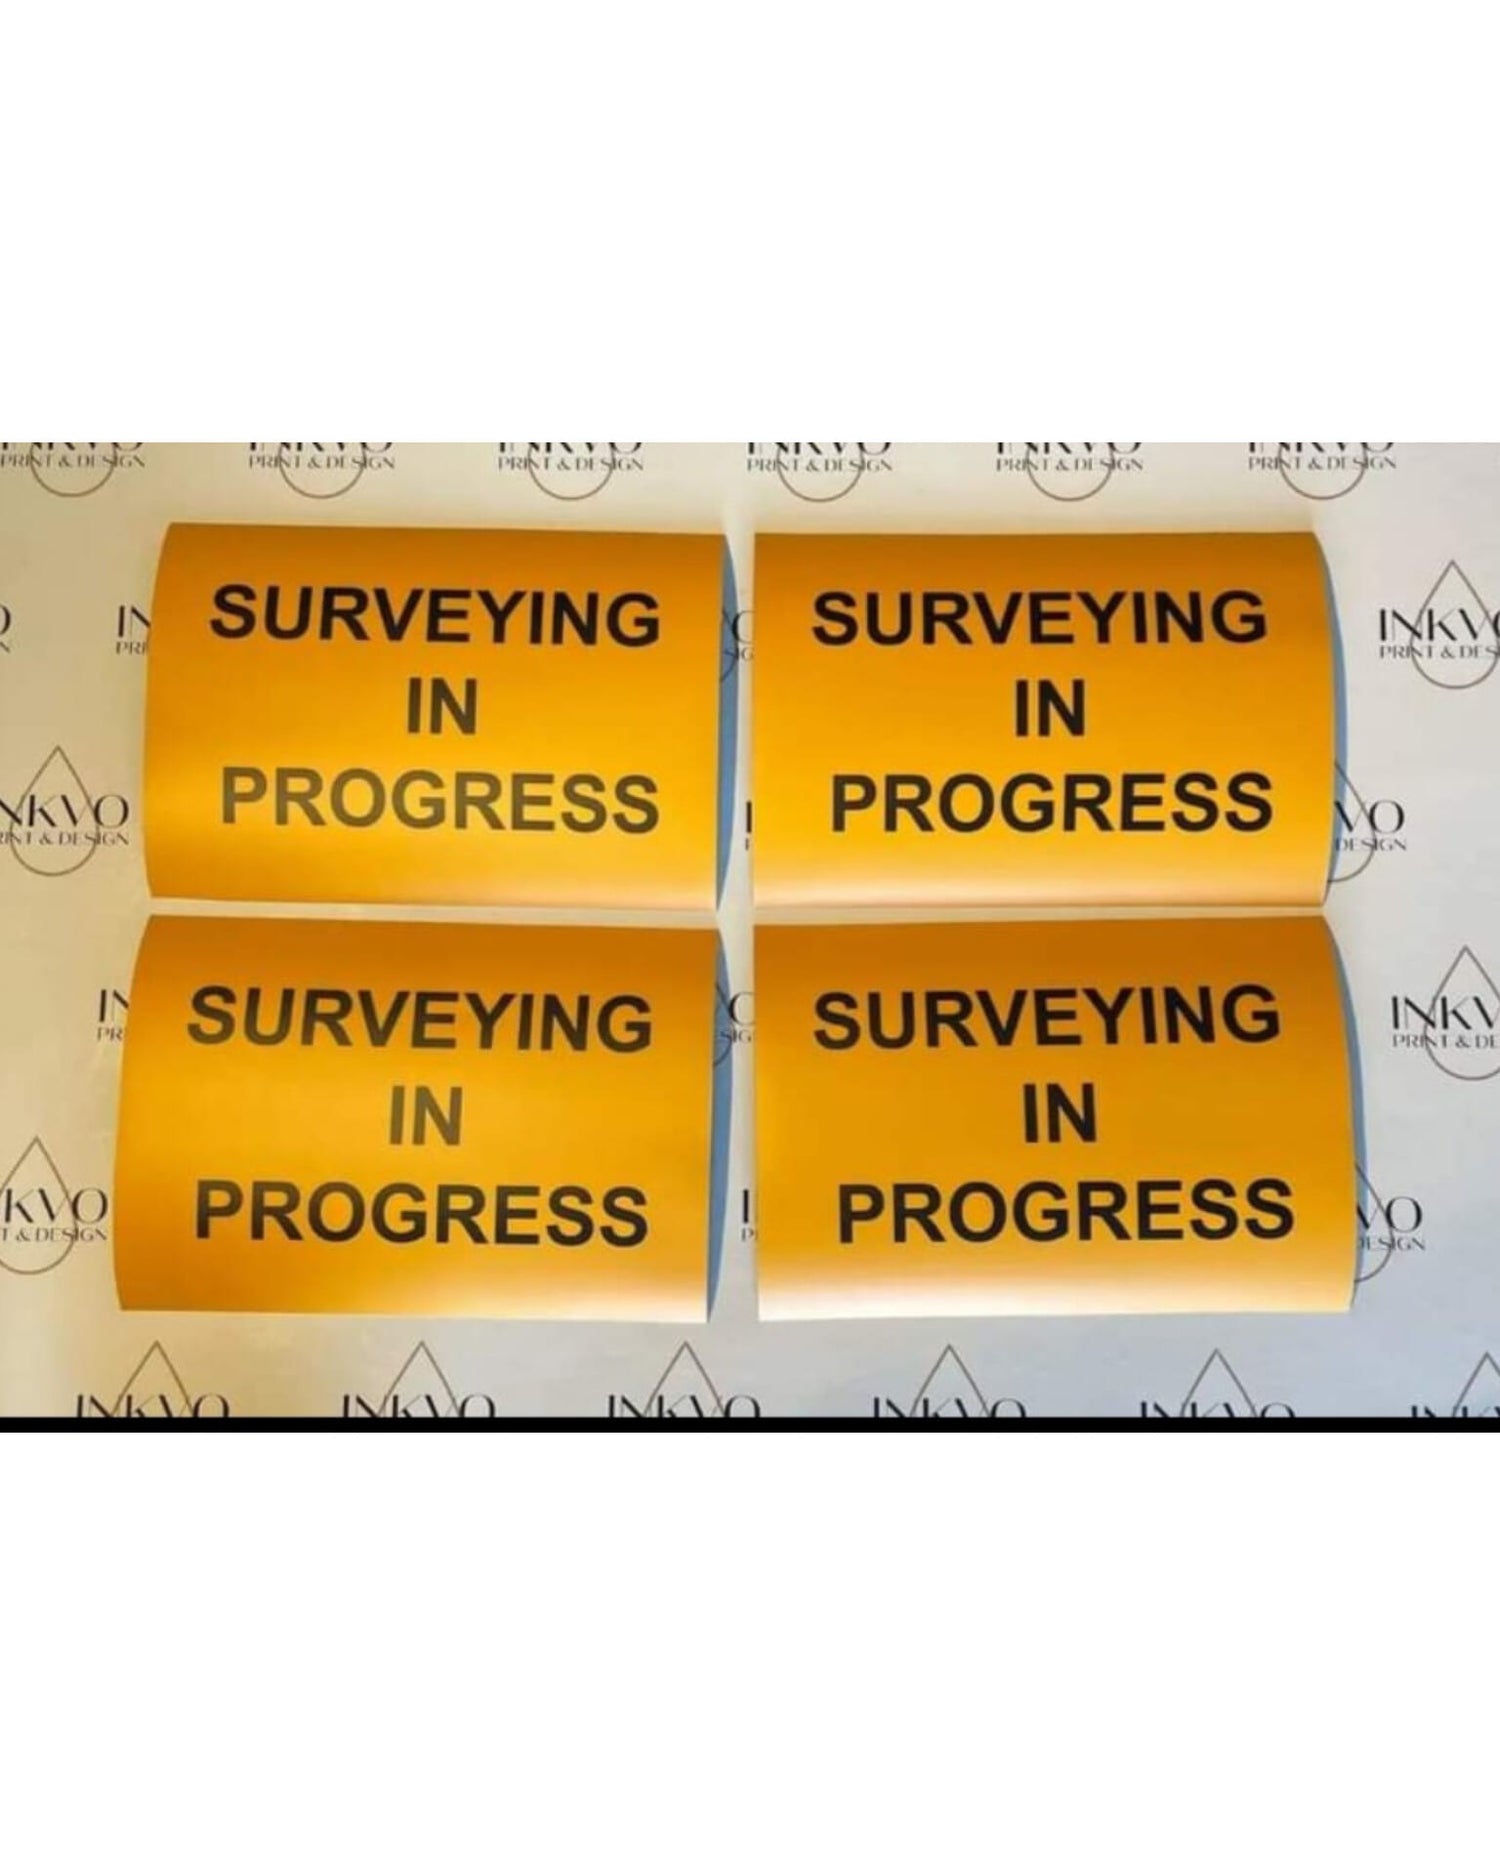 4 images of magnetic signs, with yellow background and the writing Surveying in progress